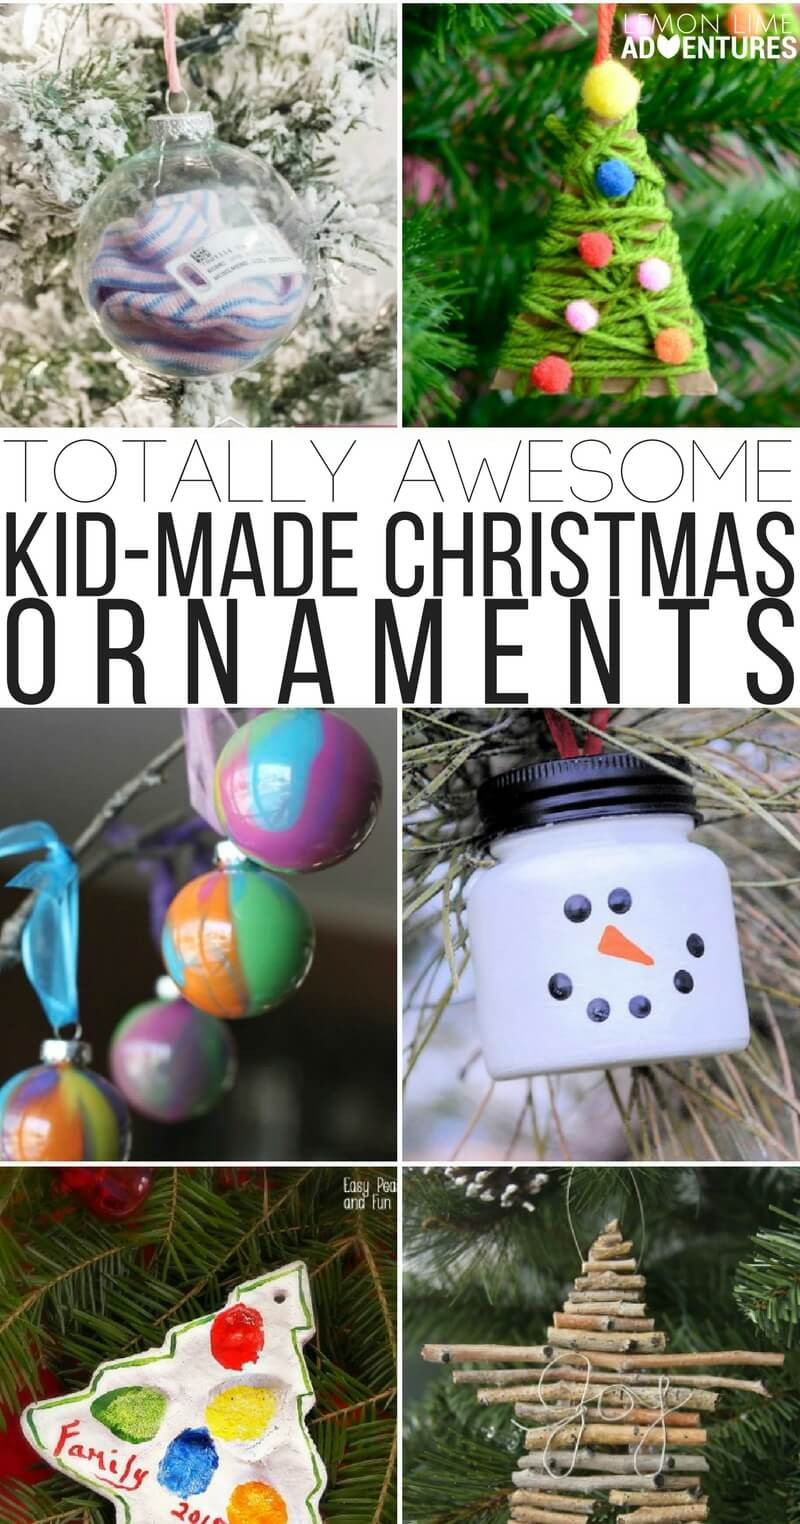 Kids DIY Christmas Ornaments
 Totally Awesome Kid Made Christmas Ornaments